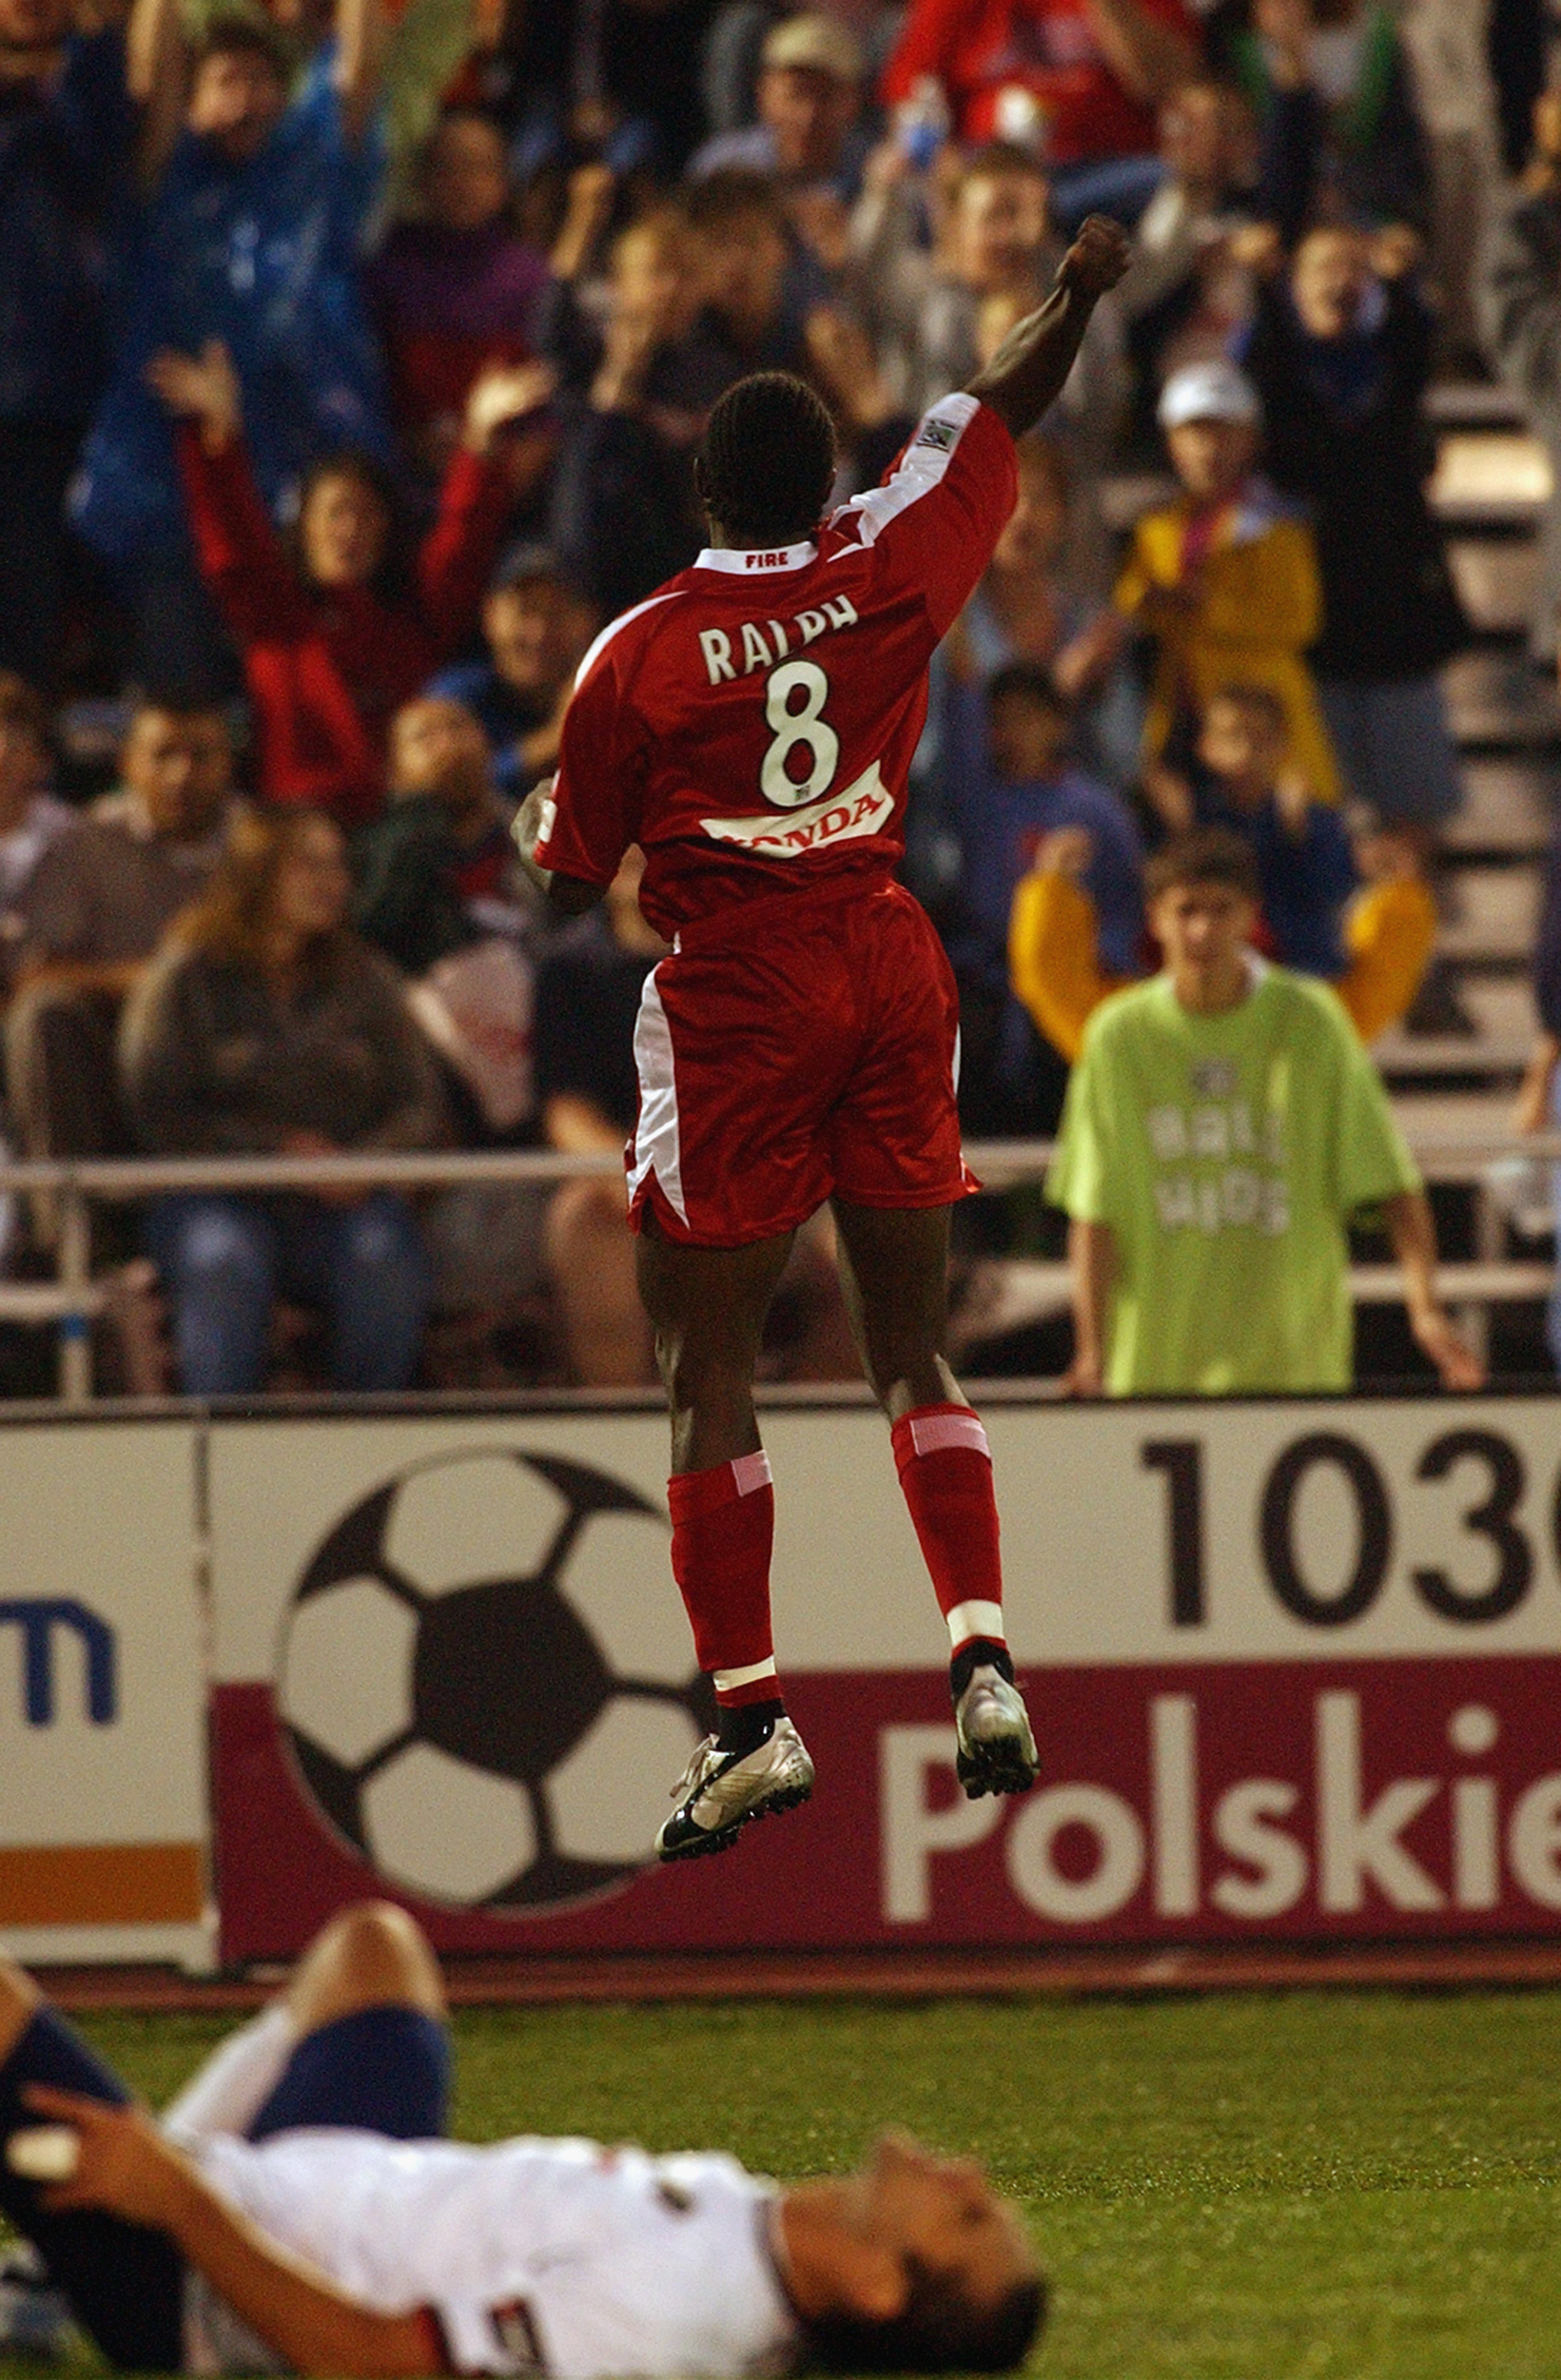 NAPERVILLE, IL - JUNE 18:  Damani Ralph #8 of the Chicago Fire celebrates during their MLS game on June 18, 2003 at Cardinal Stadium in Naperville, Illinois. The Fire defeated the Burn 4-1.  (Photo by Jonathan Daniel/Getty Images)